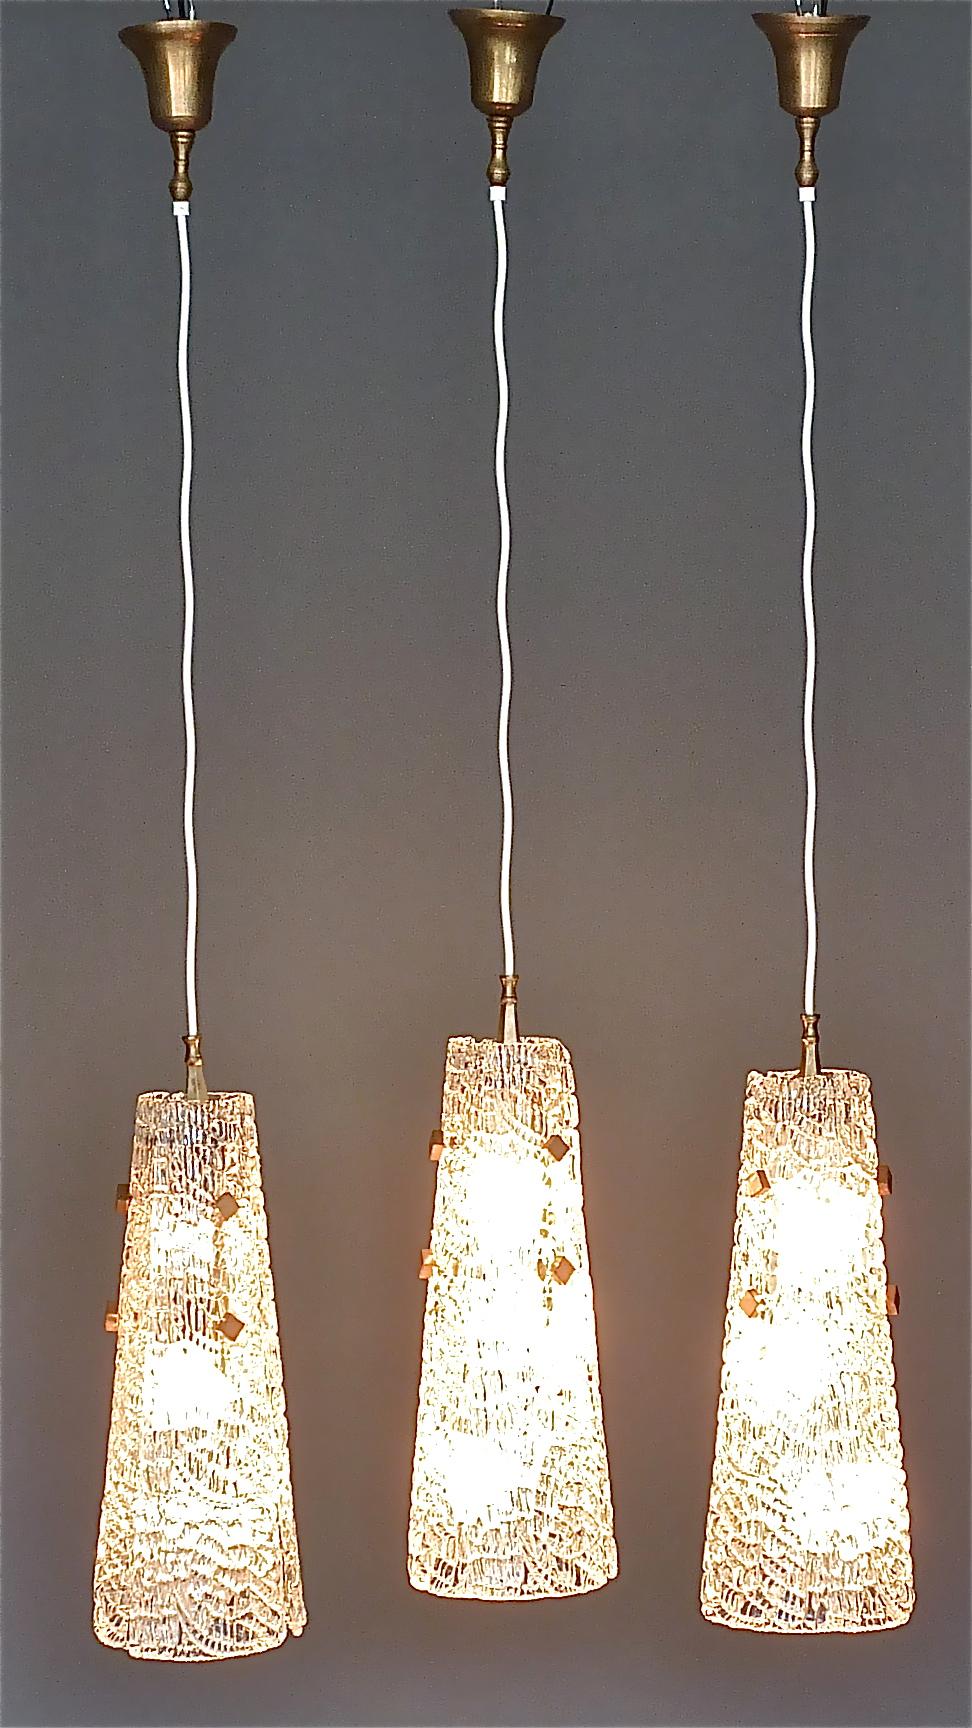 Set of 3 Large Paolo Venini Lamps Textured Murano Ice Glass Brass 1950 Kalmar For Sale 9